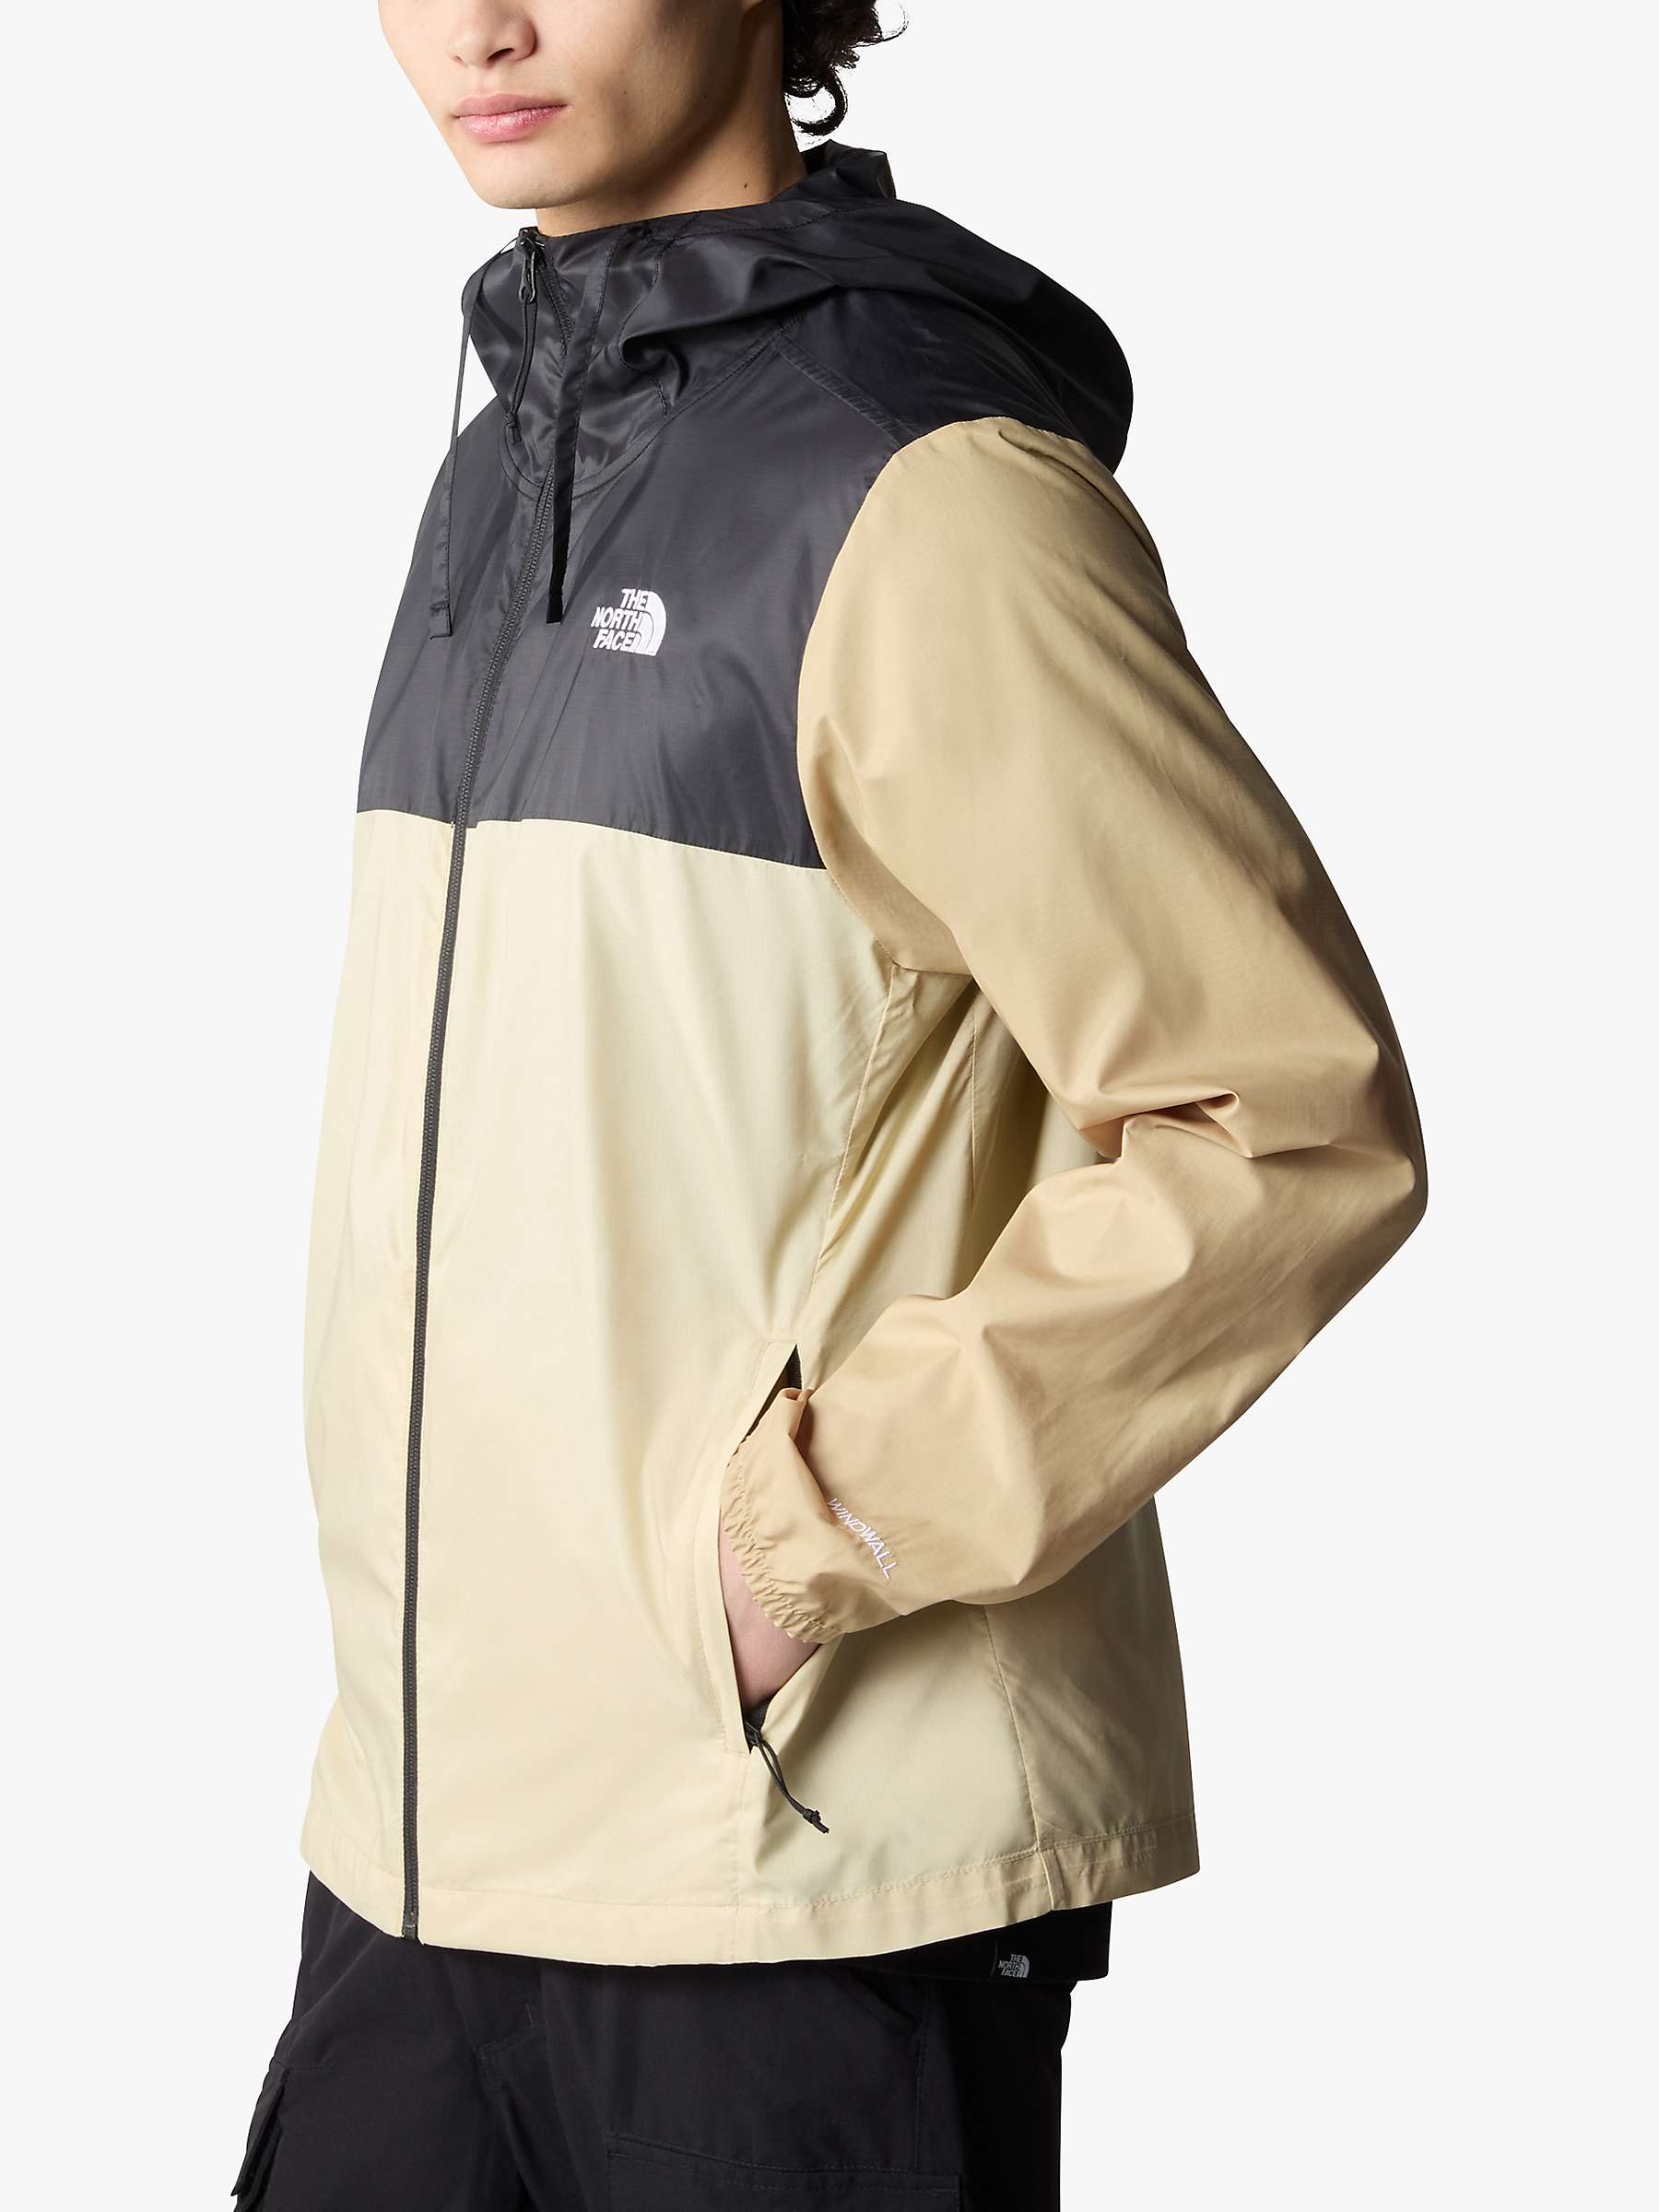 Buy The North Face Men's Cyclone III Jacket, Gravel/Stone Online at johnlewis.com